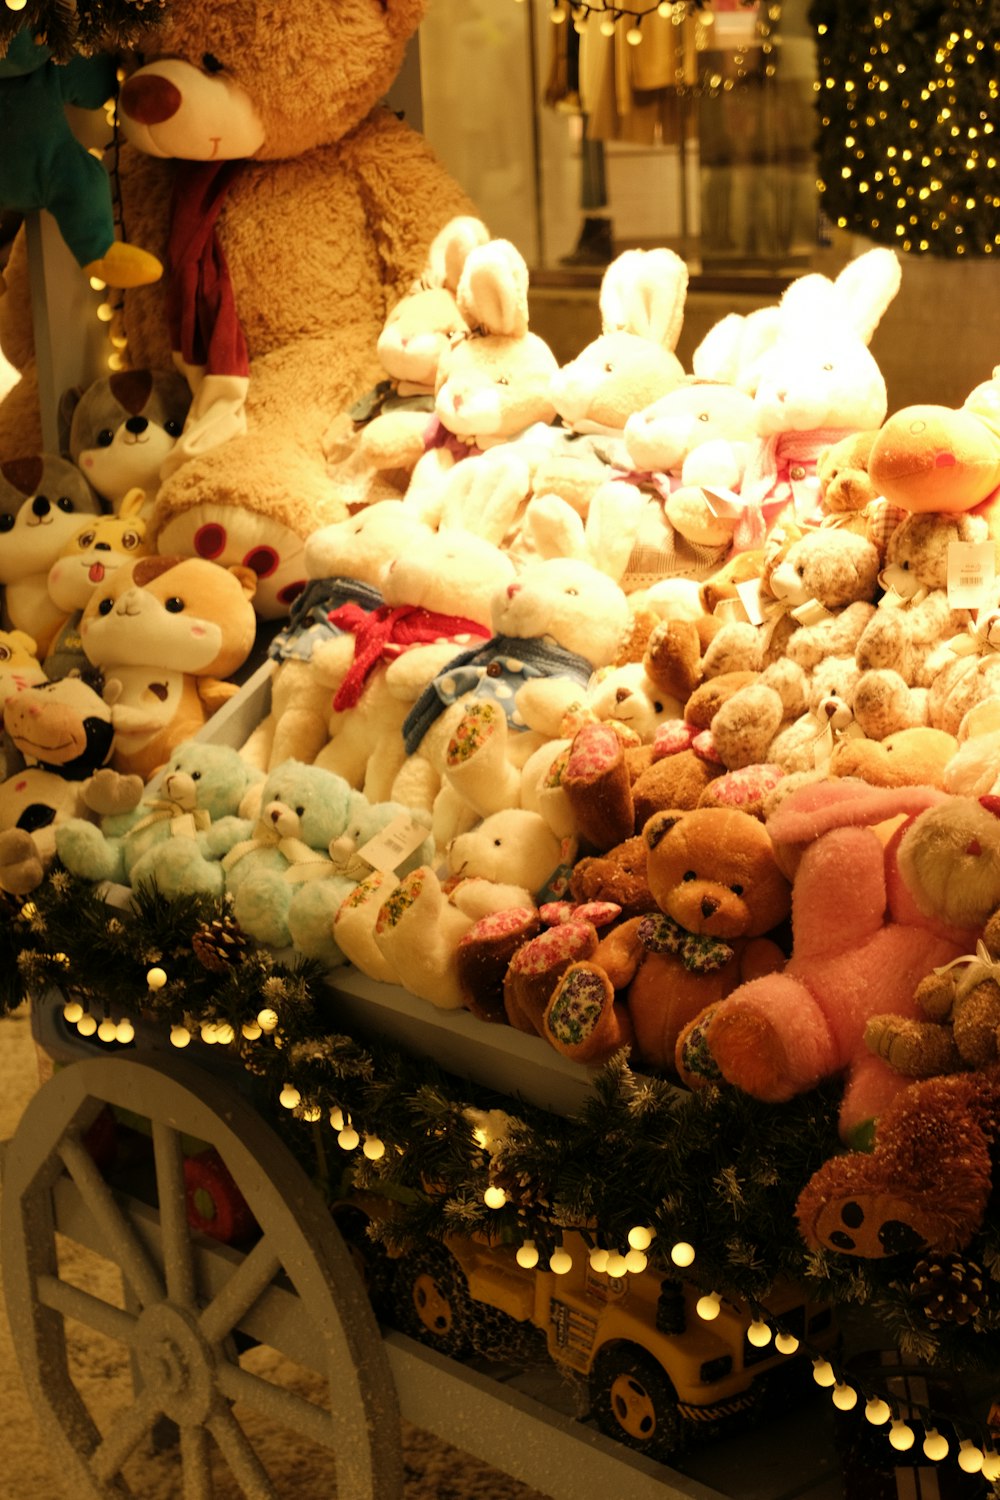 a wagon filled with lots of stuffed animals